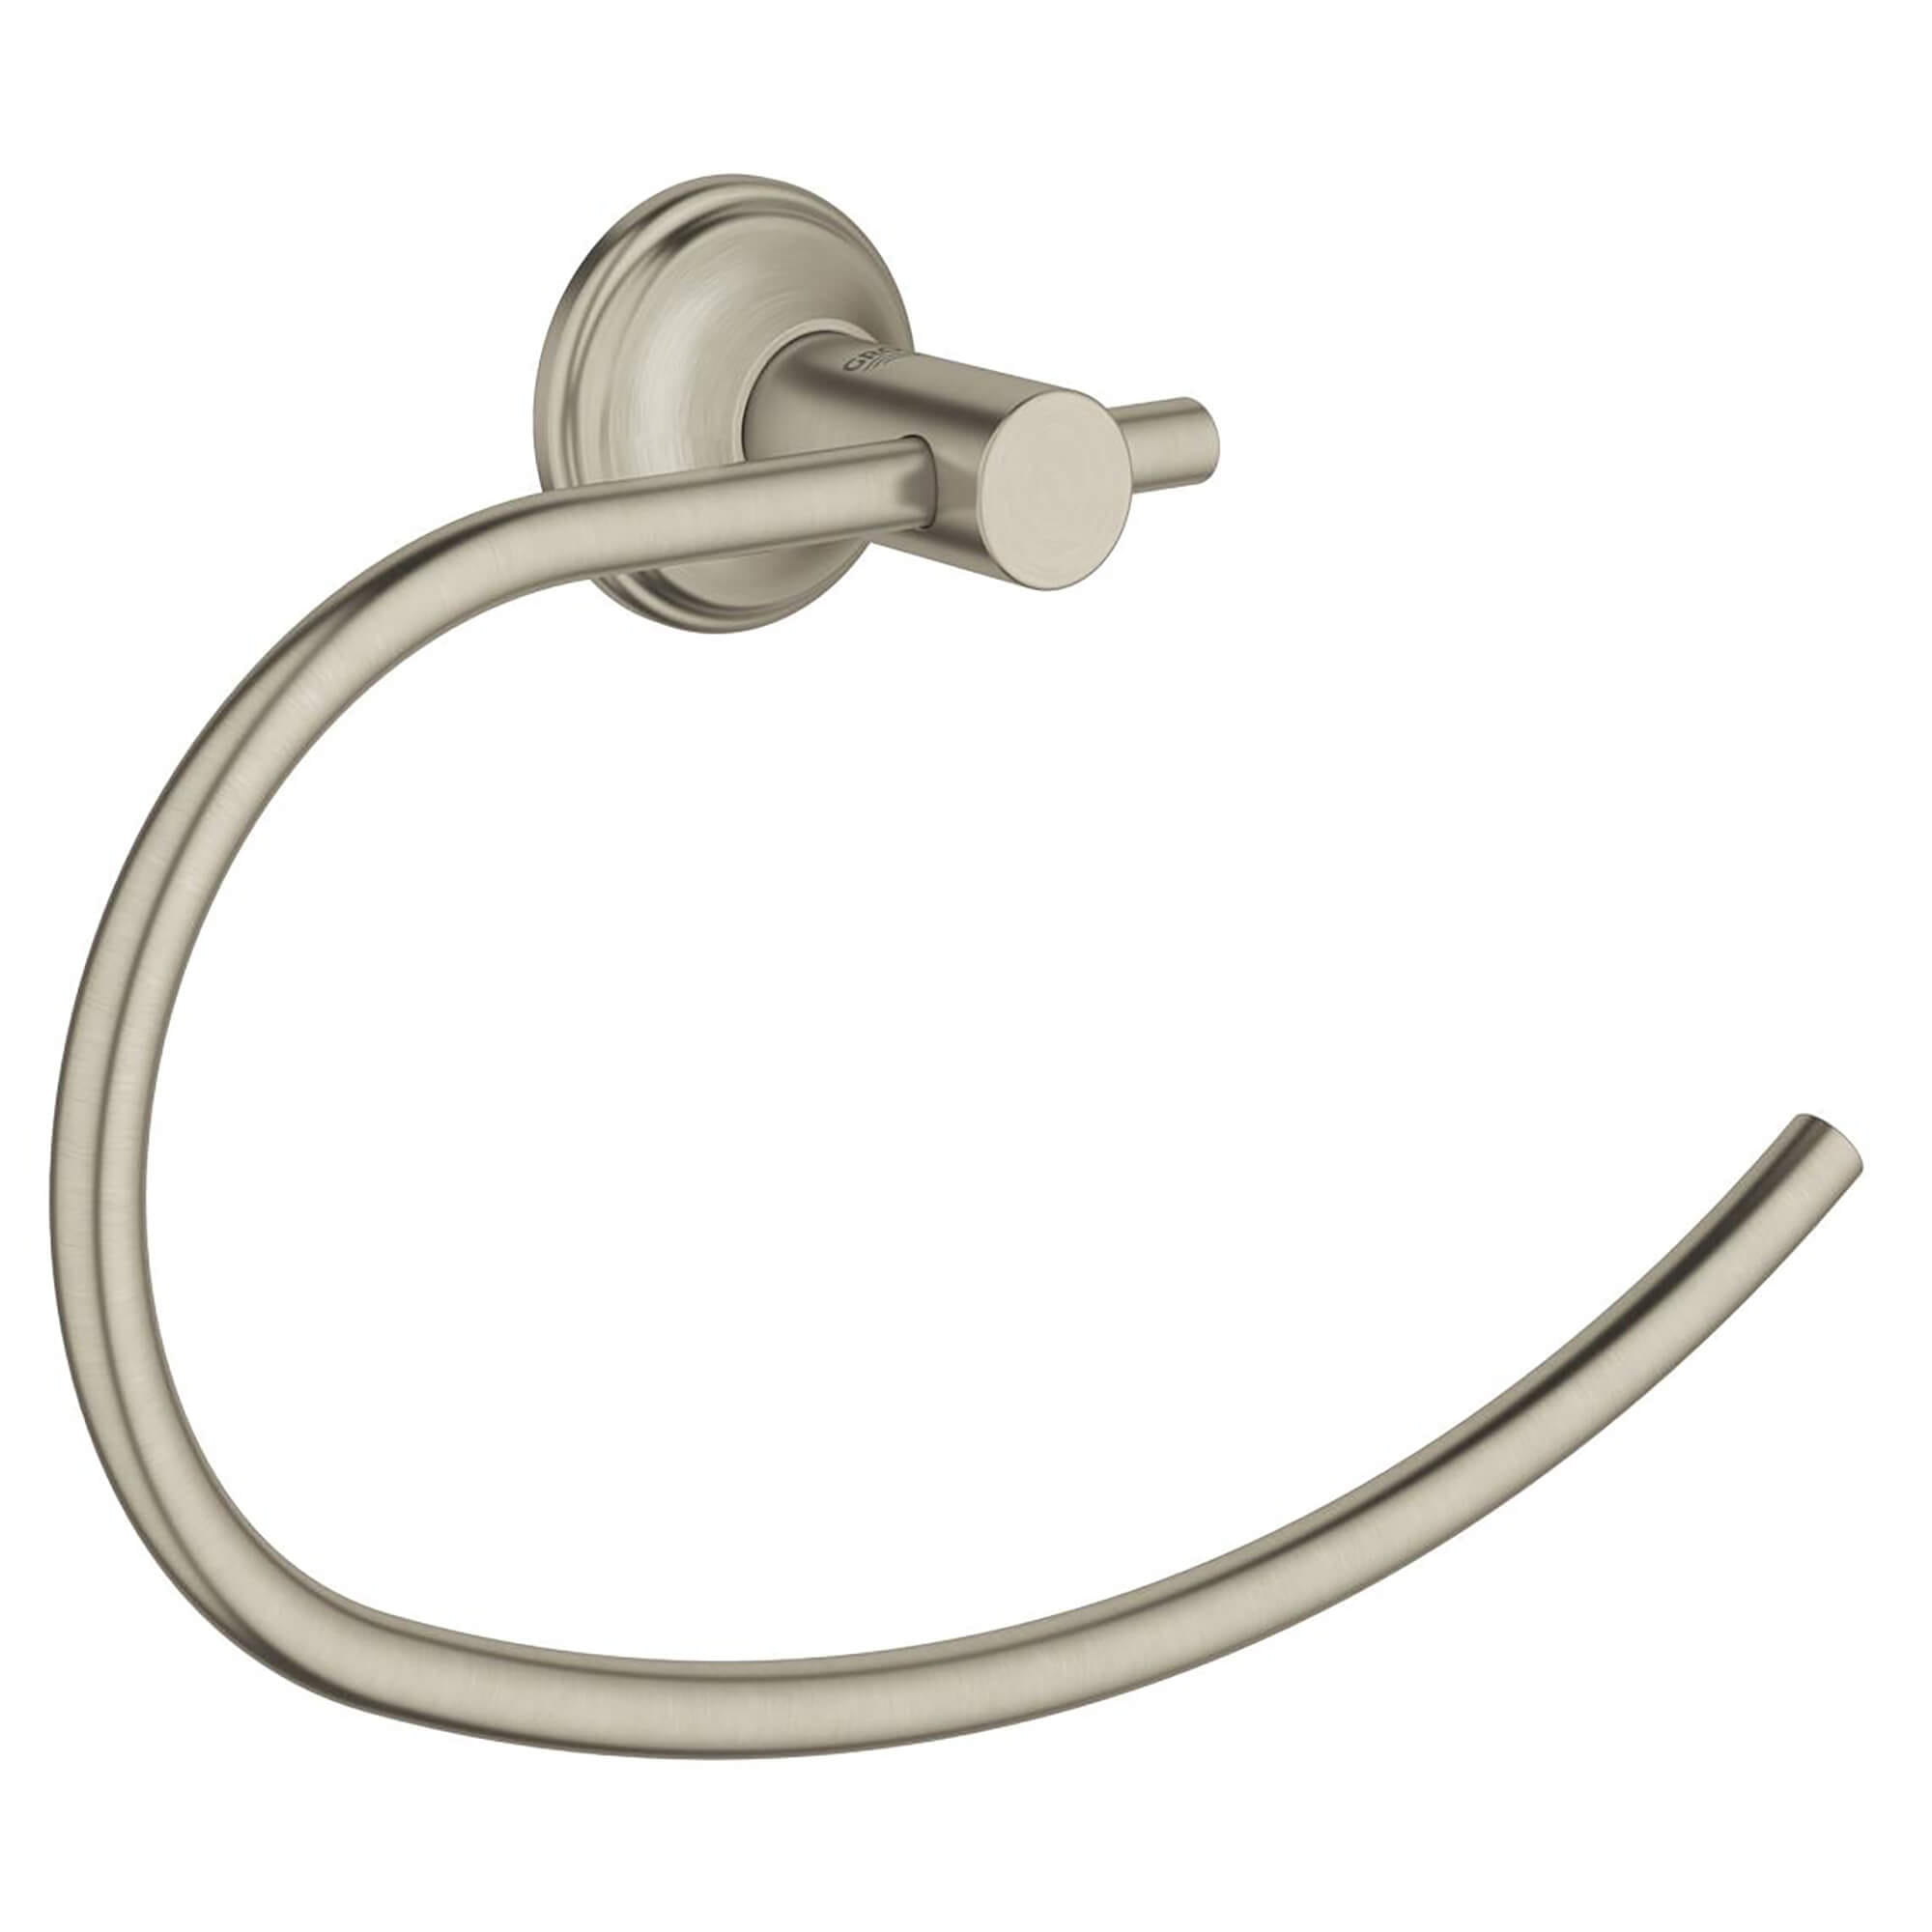 Fairborn Towel Ring GROHE BRUSHED NICKEL